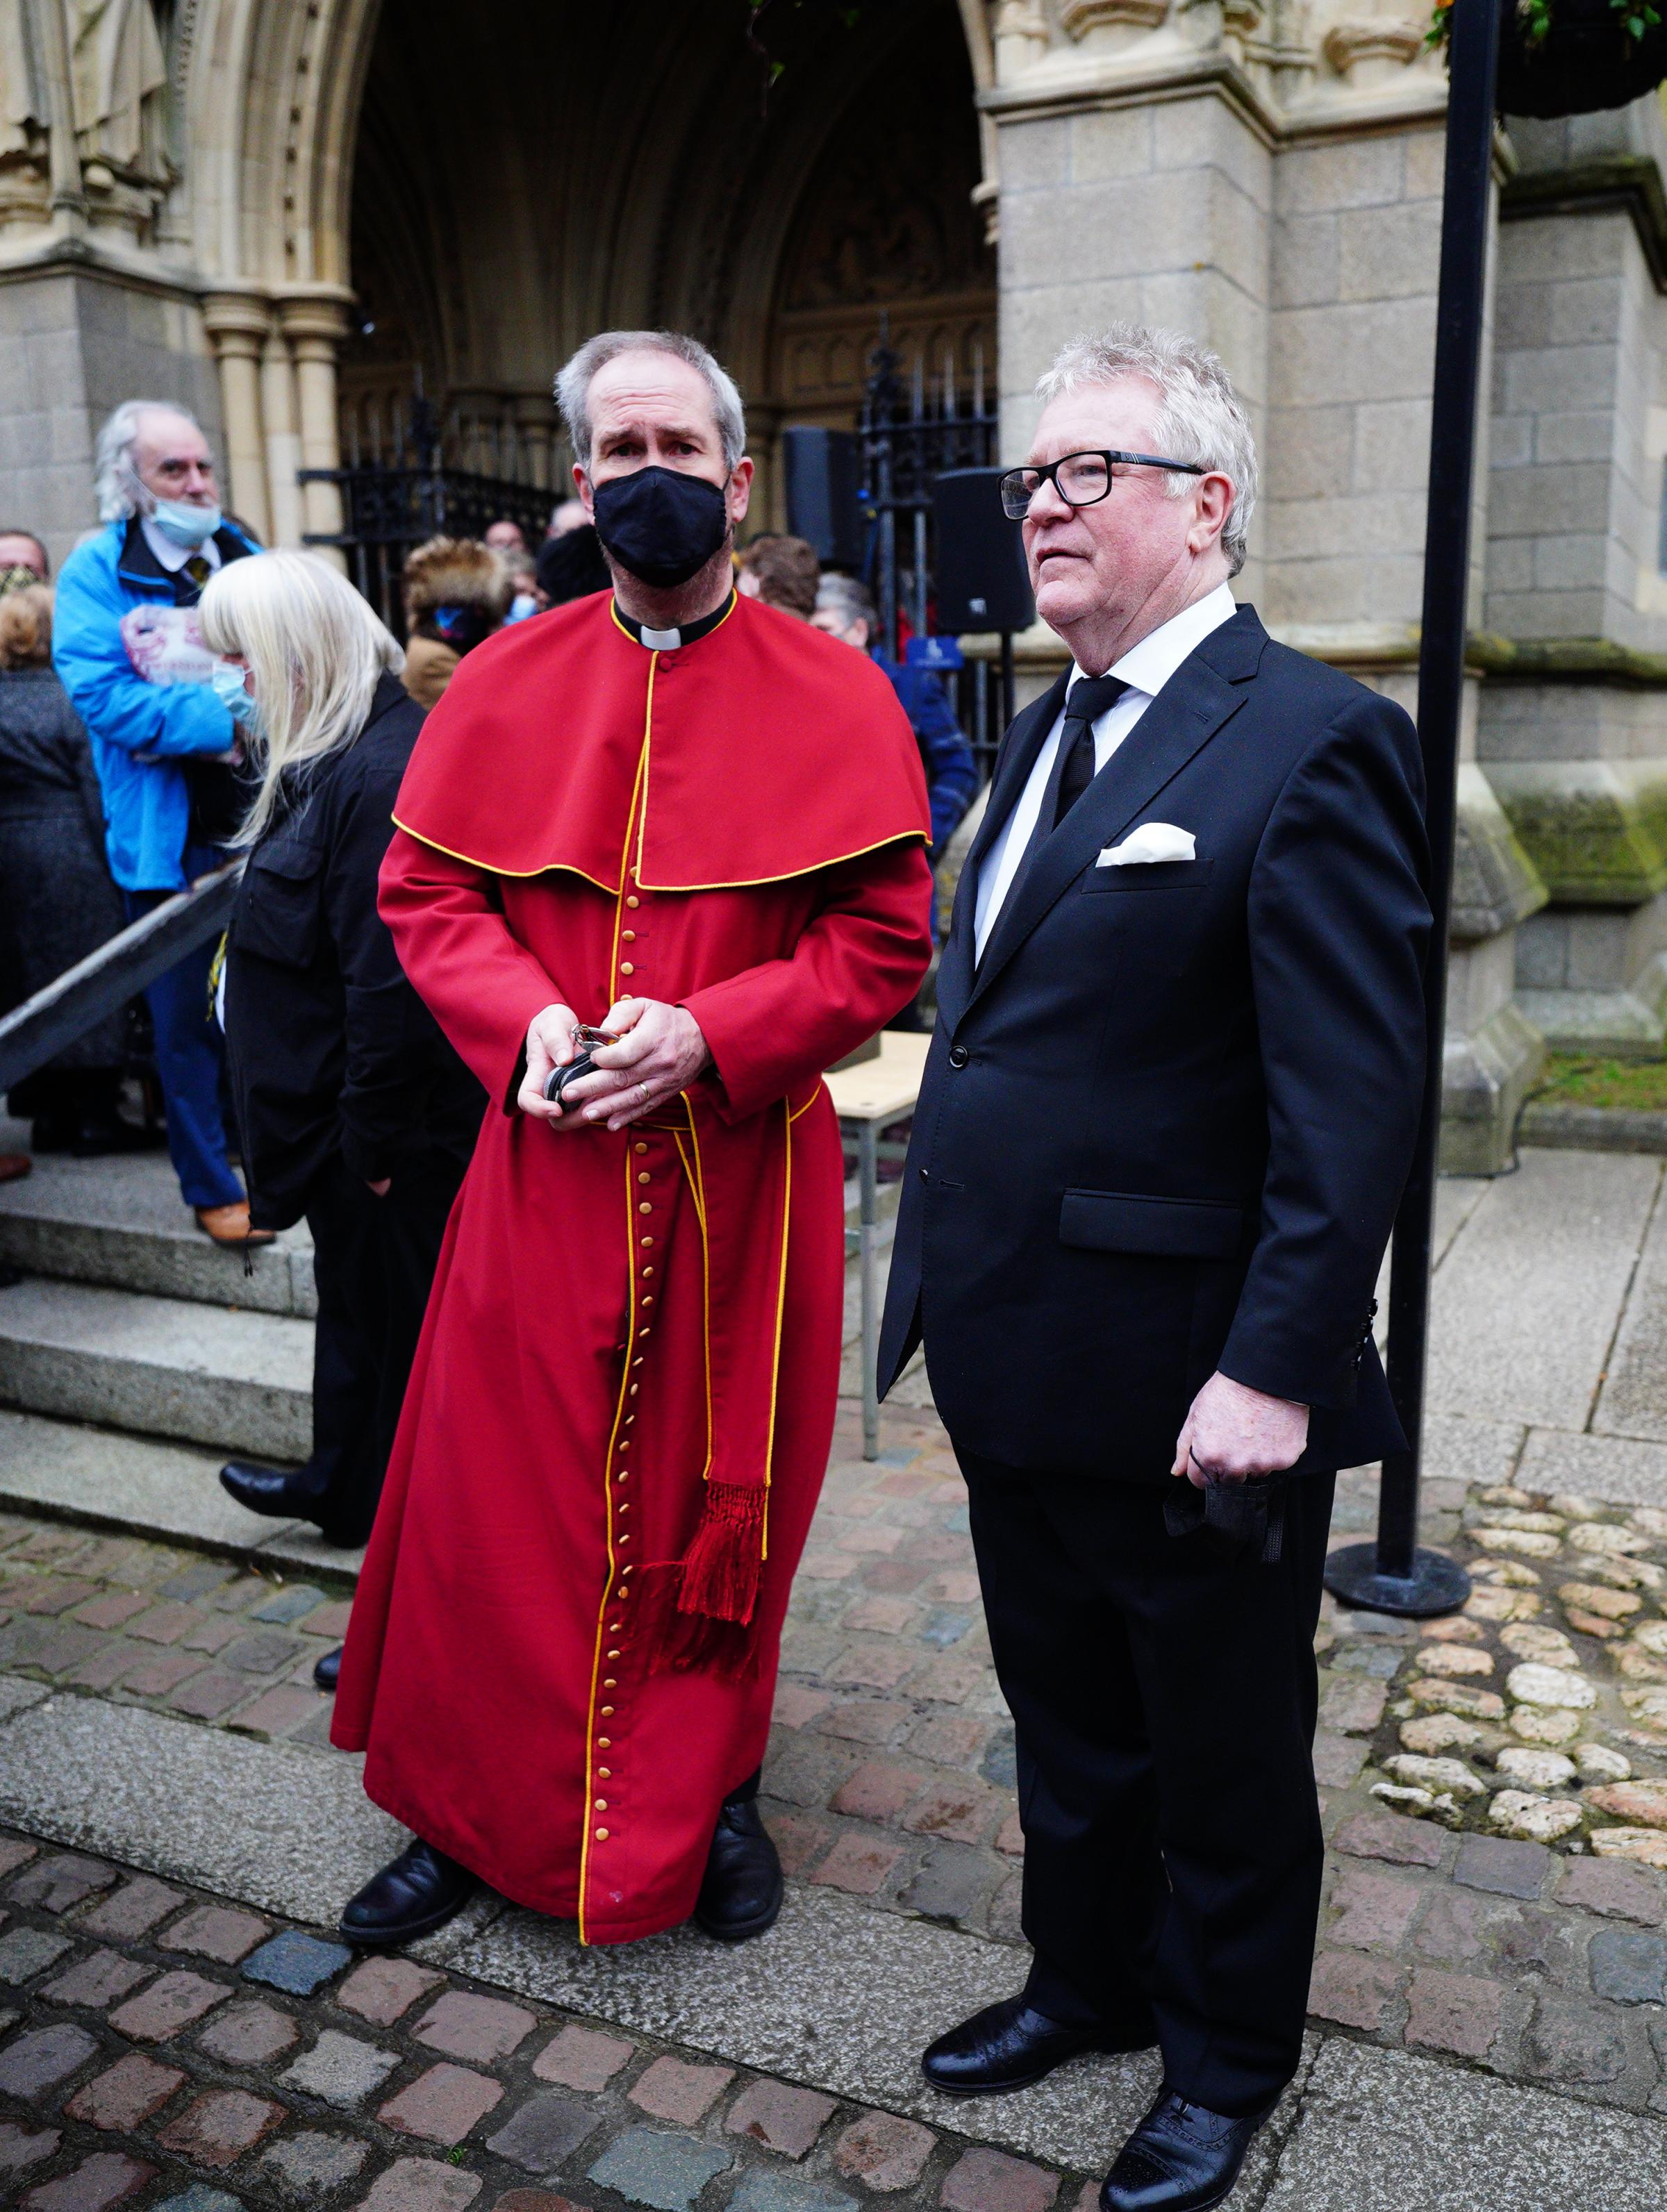 Jim Davidson (right) with Reverend Canon Alan Bashforth ahead of the funeral of Cornish comedian Jethro at Truro Cathedral in Cornwall. Jethro, real name Geoffrey Rowe, died on December 14 after contracting Covid-19. Picture date: Monday January 3, 2022.